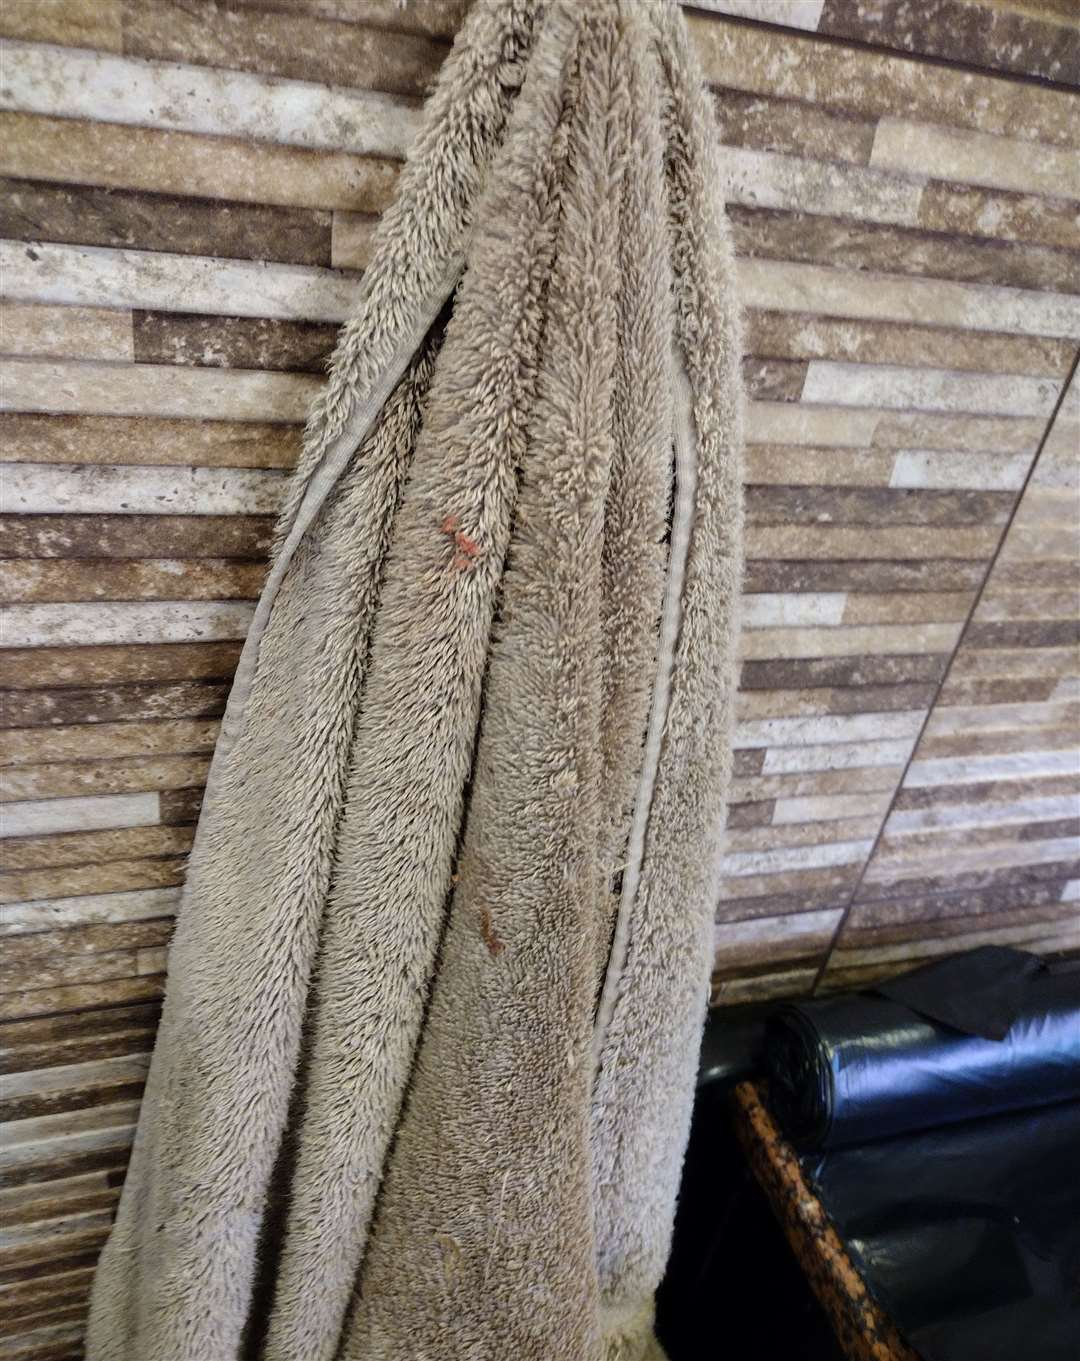 The blood-stained towel which inspectors raised concerns about at Dubai Market. Picture: Thanet District Council